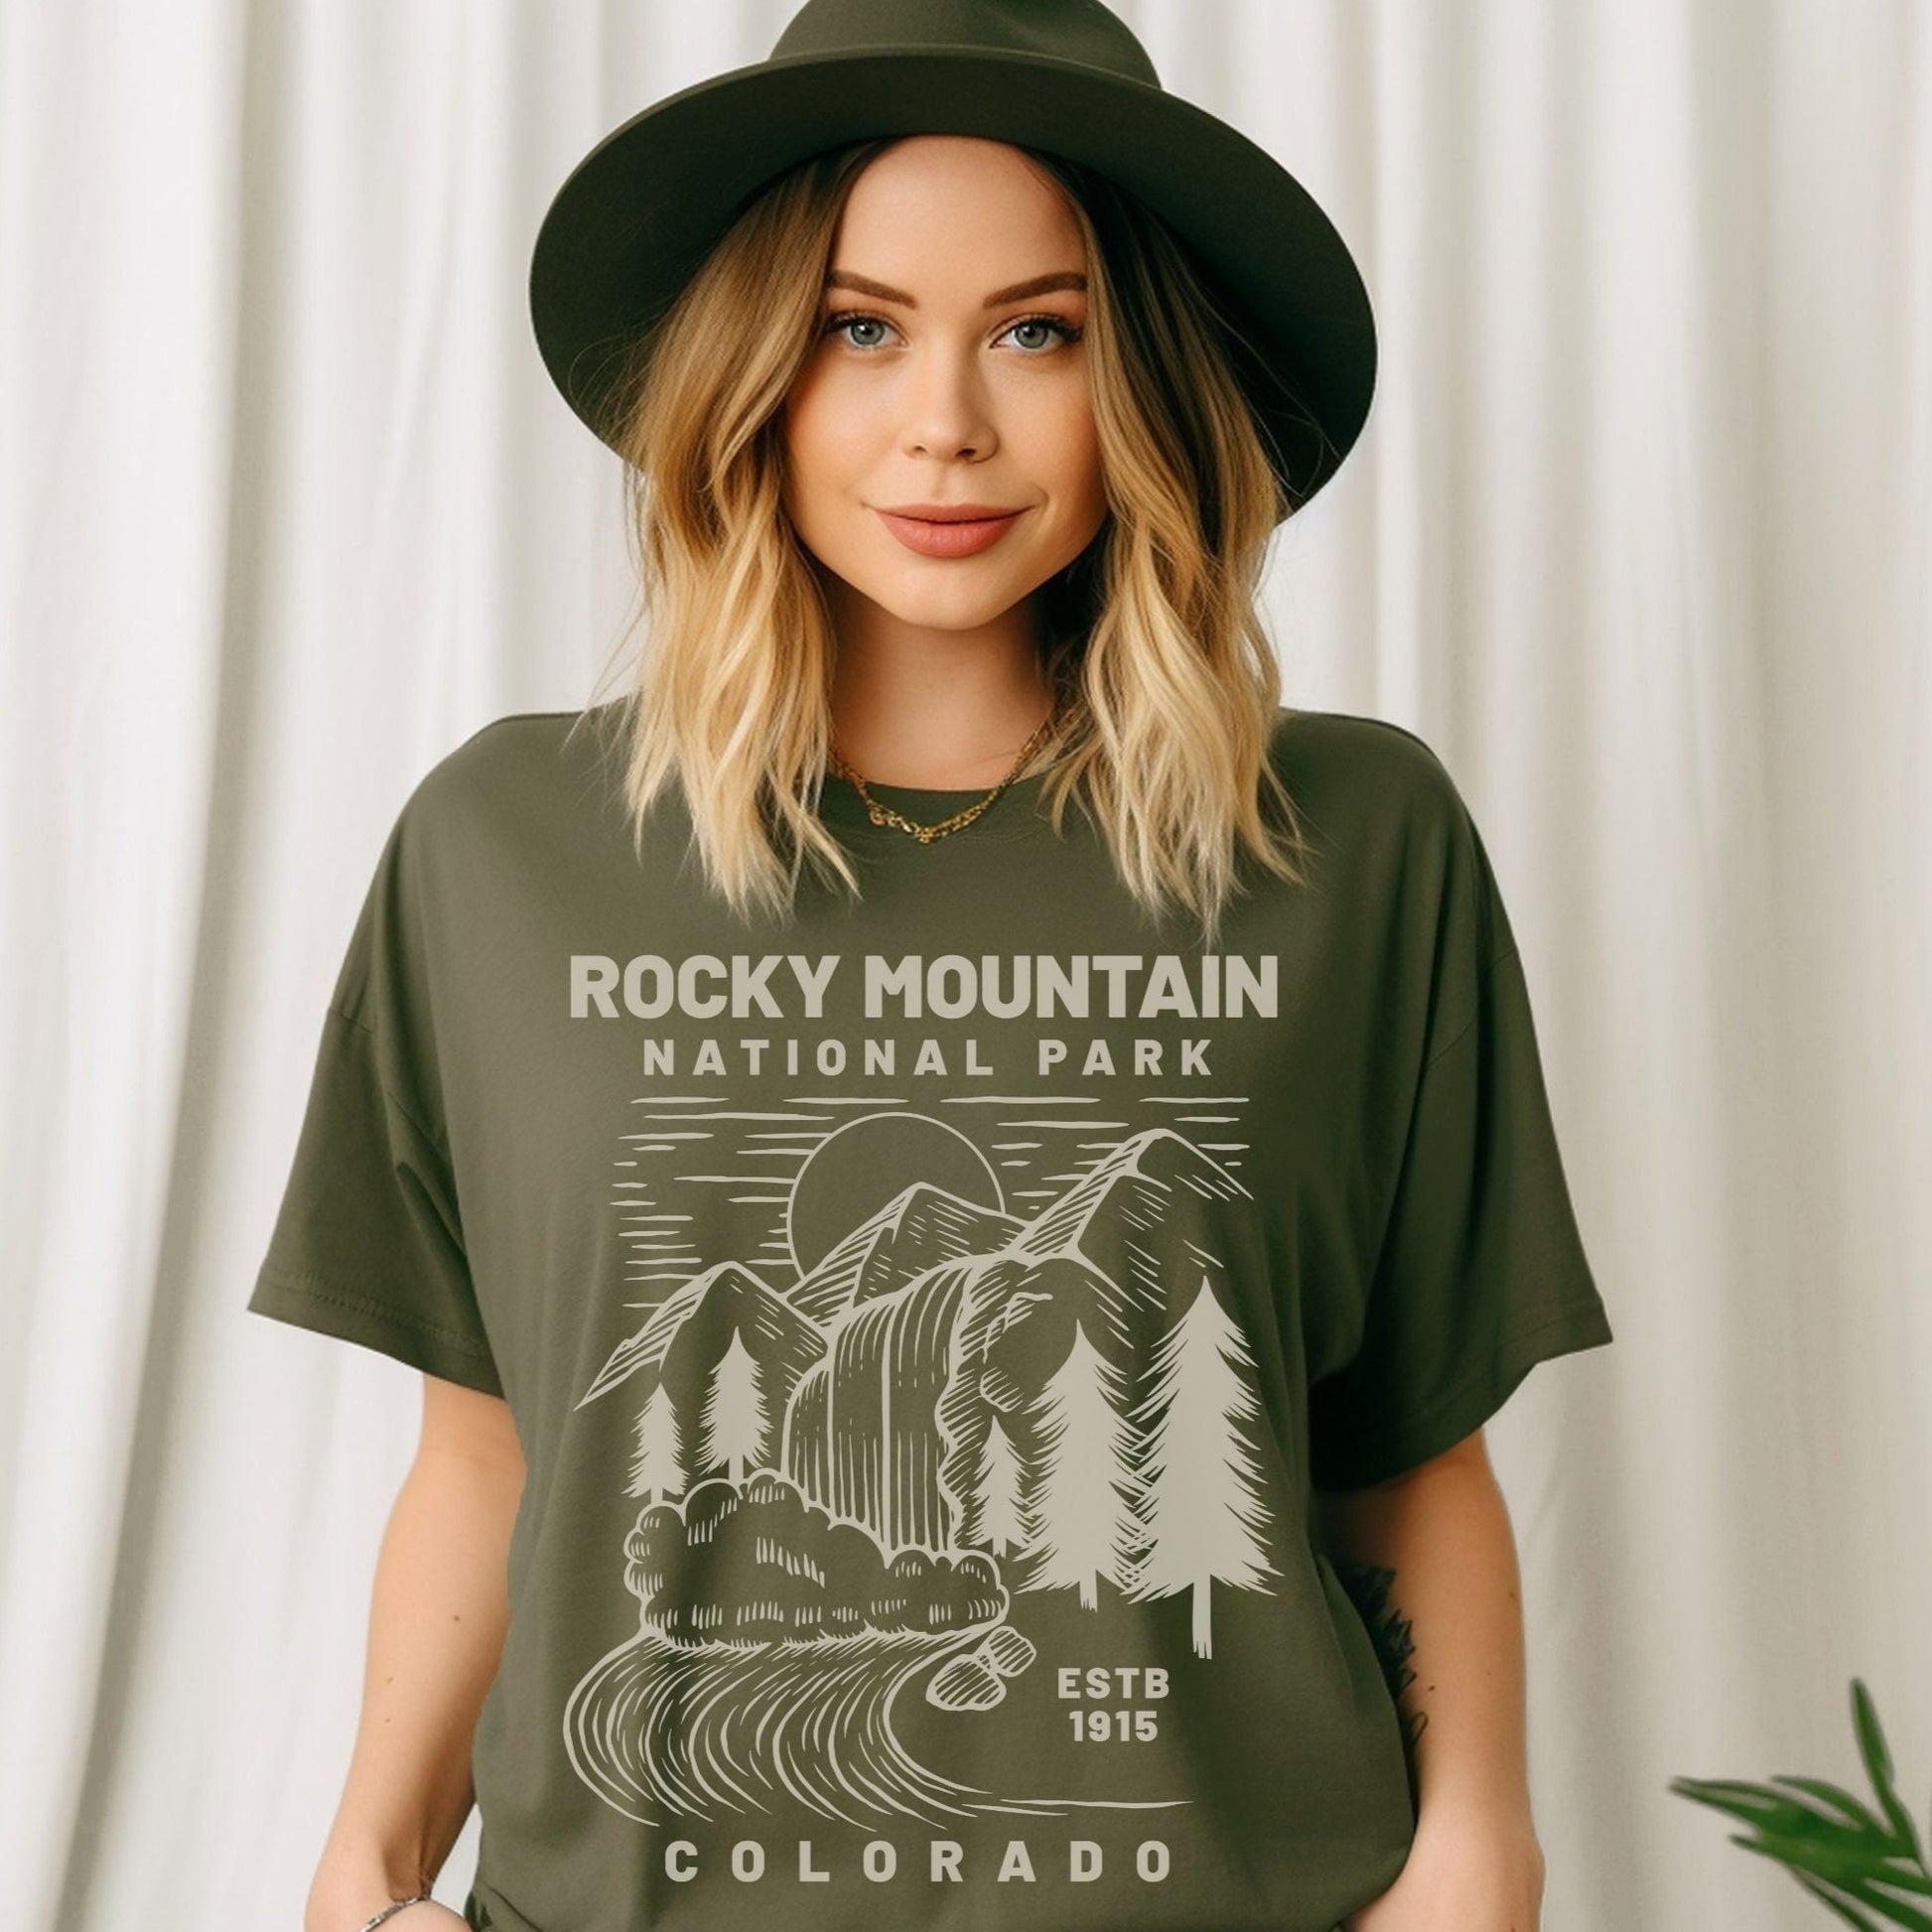 Rocky Mountain National Park ShirtBring the beauty of Rocky Mountain National Park of Colorado into your wardrobe with this simple waterfall and mountain landscape lightweight t-shirt.
Details:
- 100